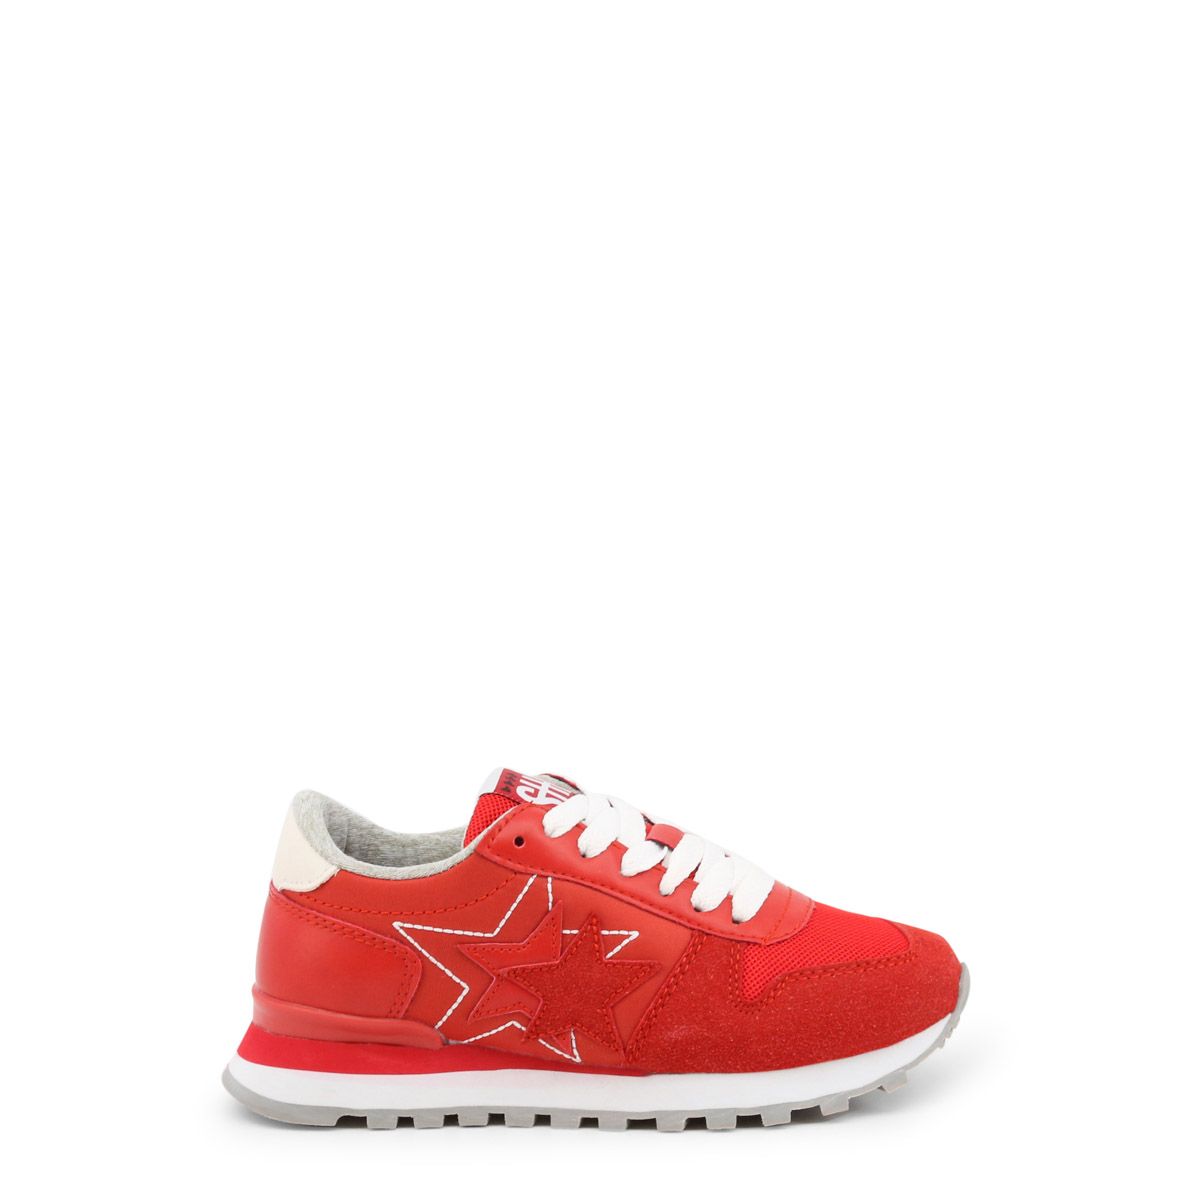 Schuhe & Sneakers & Kinder & Shone & 617k-016_Red & Rot